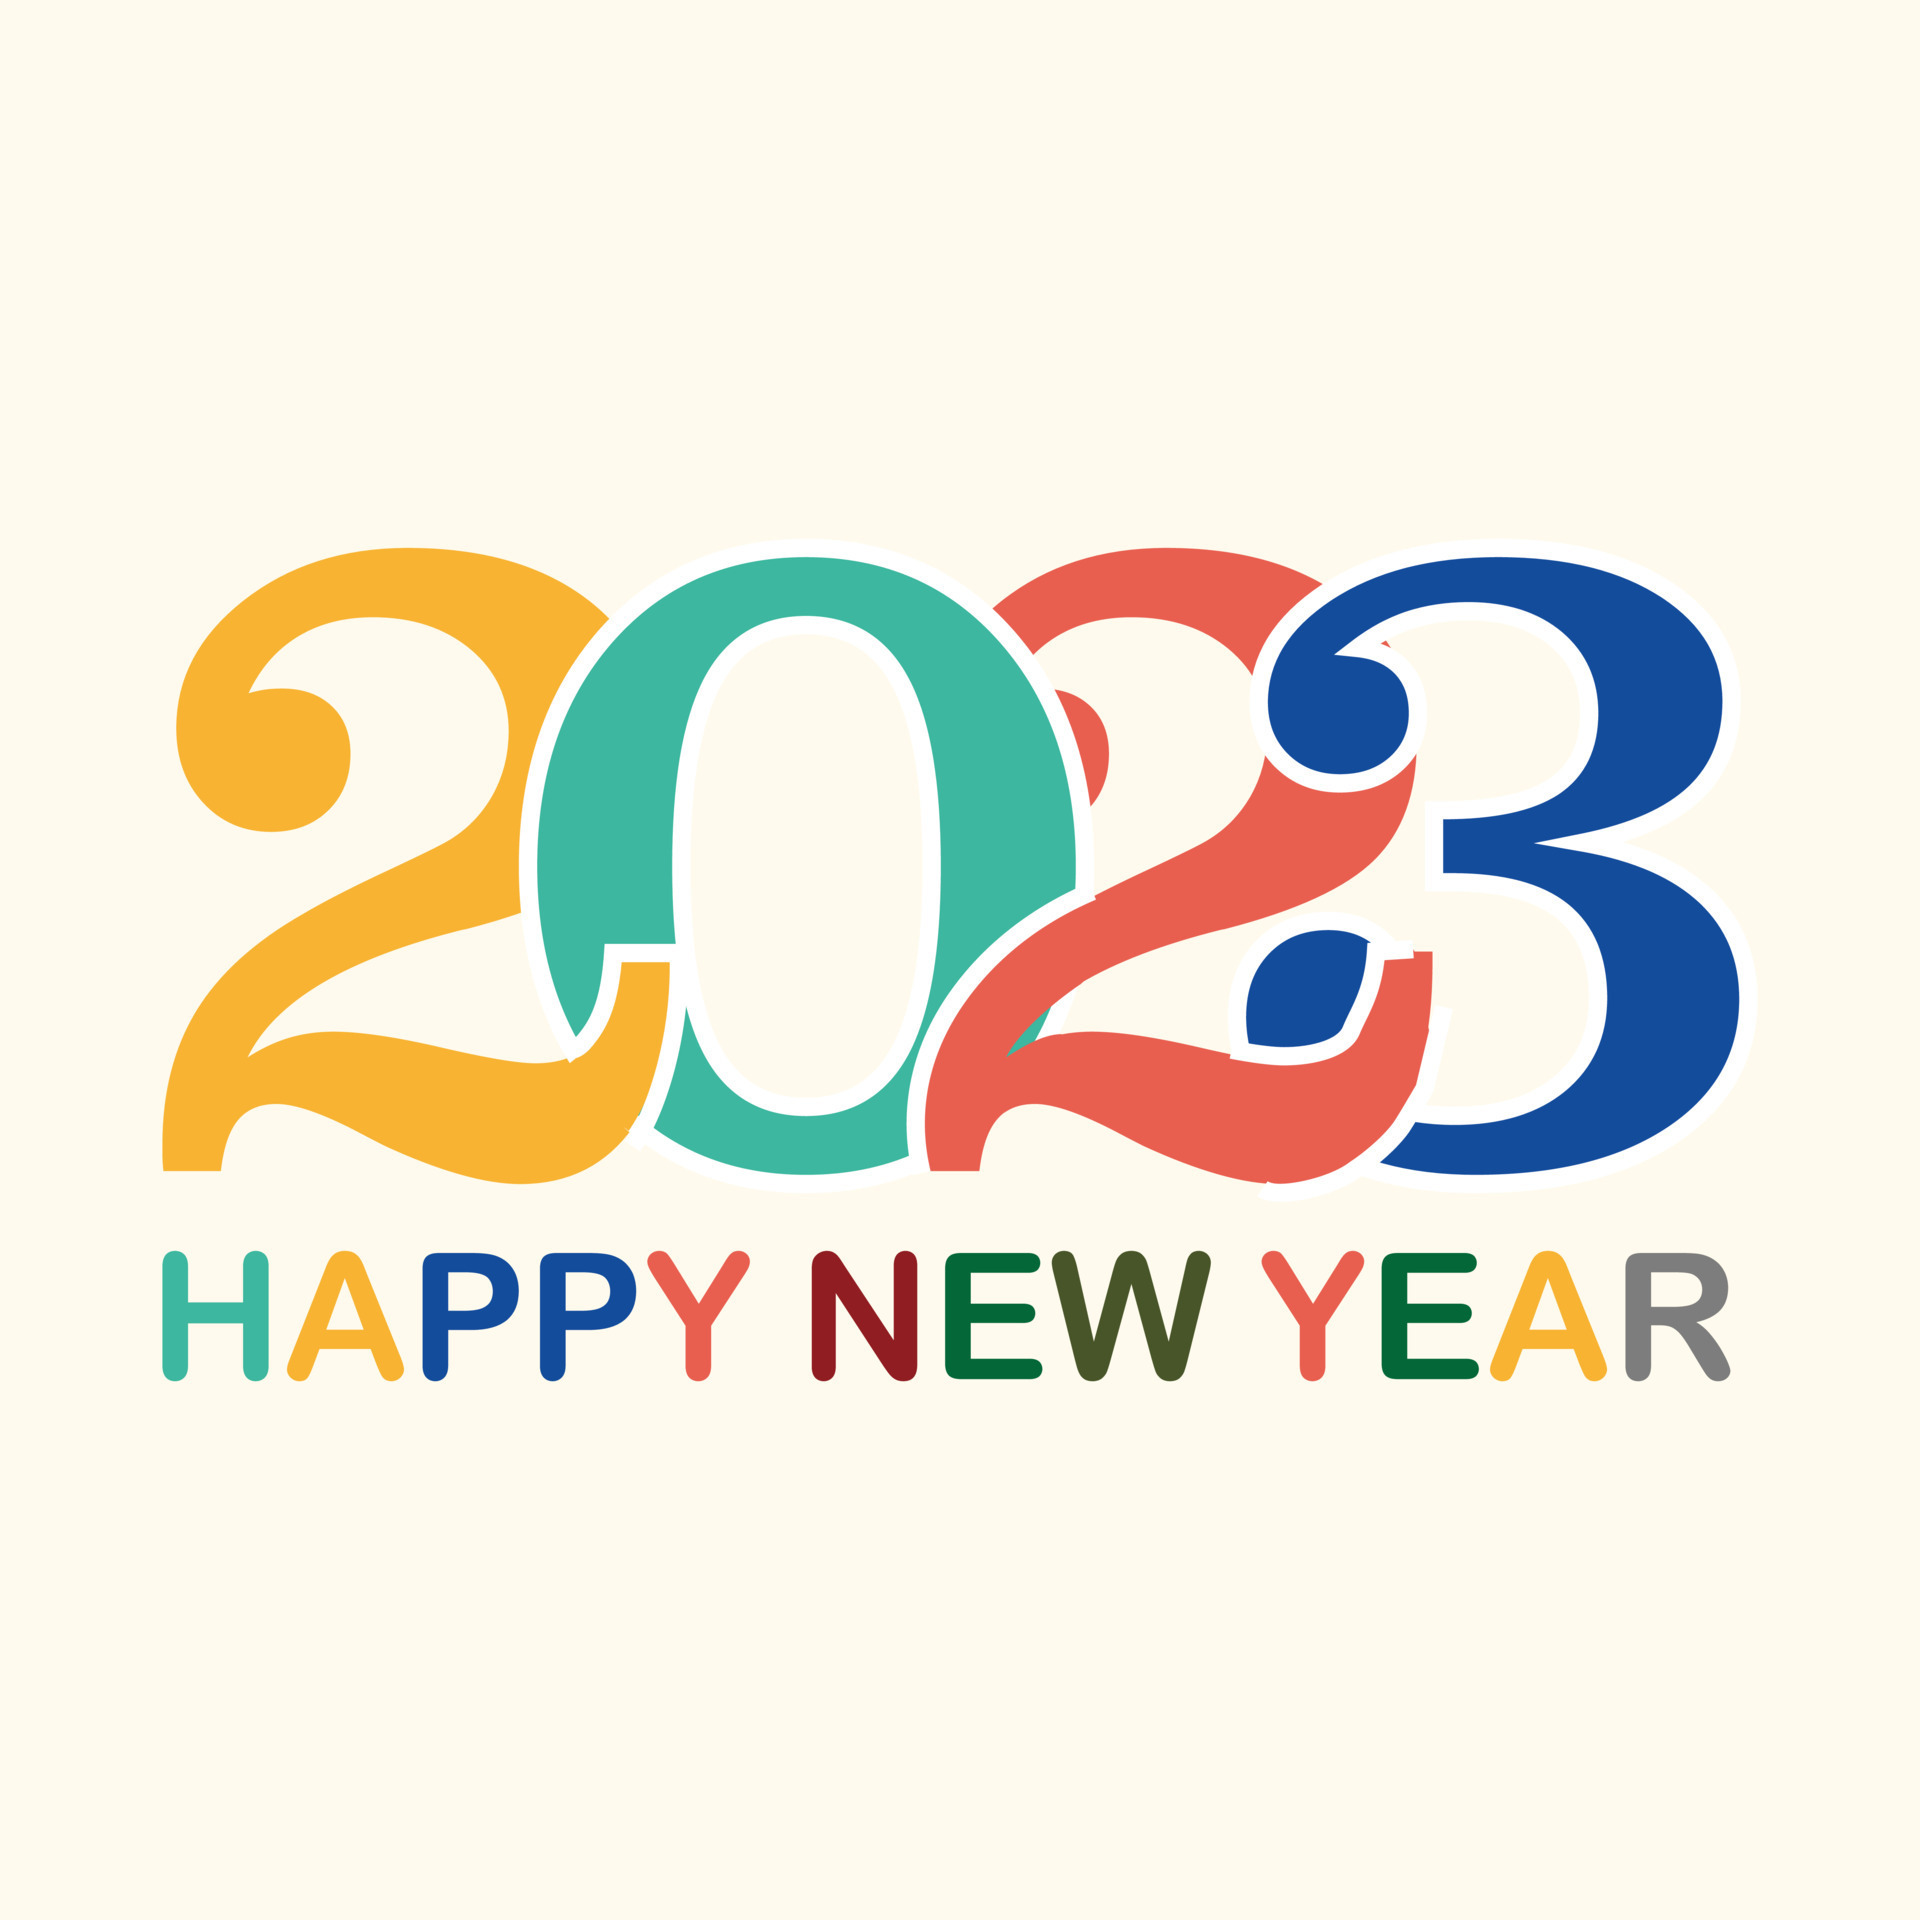 https://static.vecteezy.com/system/resources/previews/014/495/223/original/typography-design-for-2023-new-year-s-greetings-in-calm-and-soft-colors-new-year-s-eve-2023-background-with-lively-colors-to-celebrate-the-new-year-s-party-vector.jpg